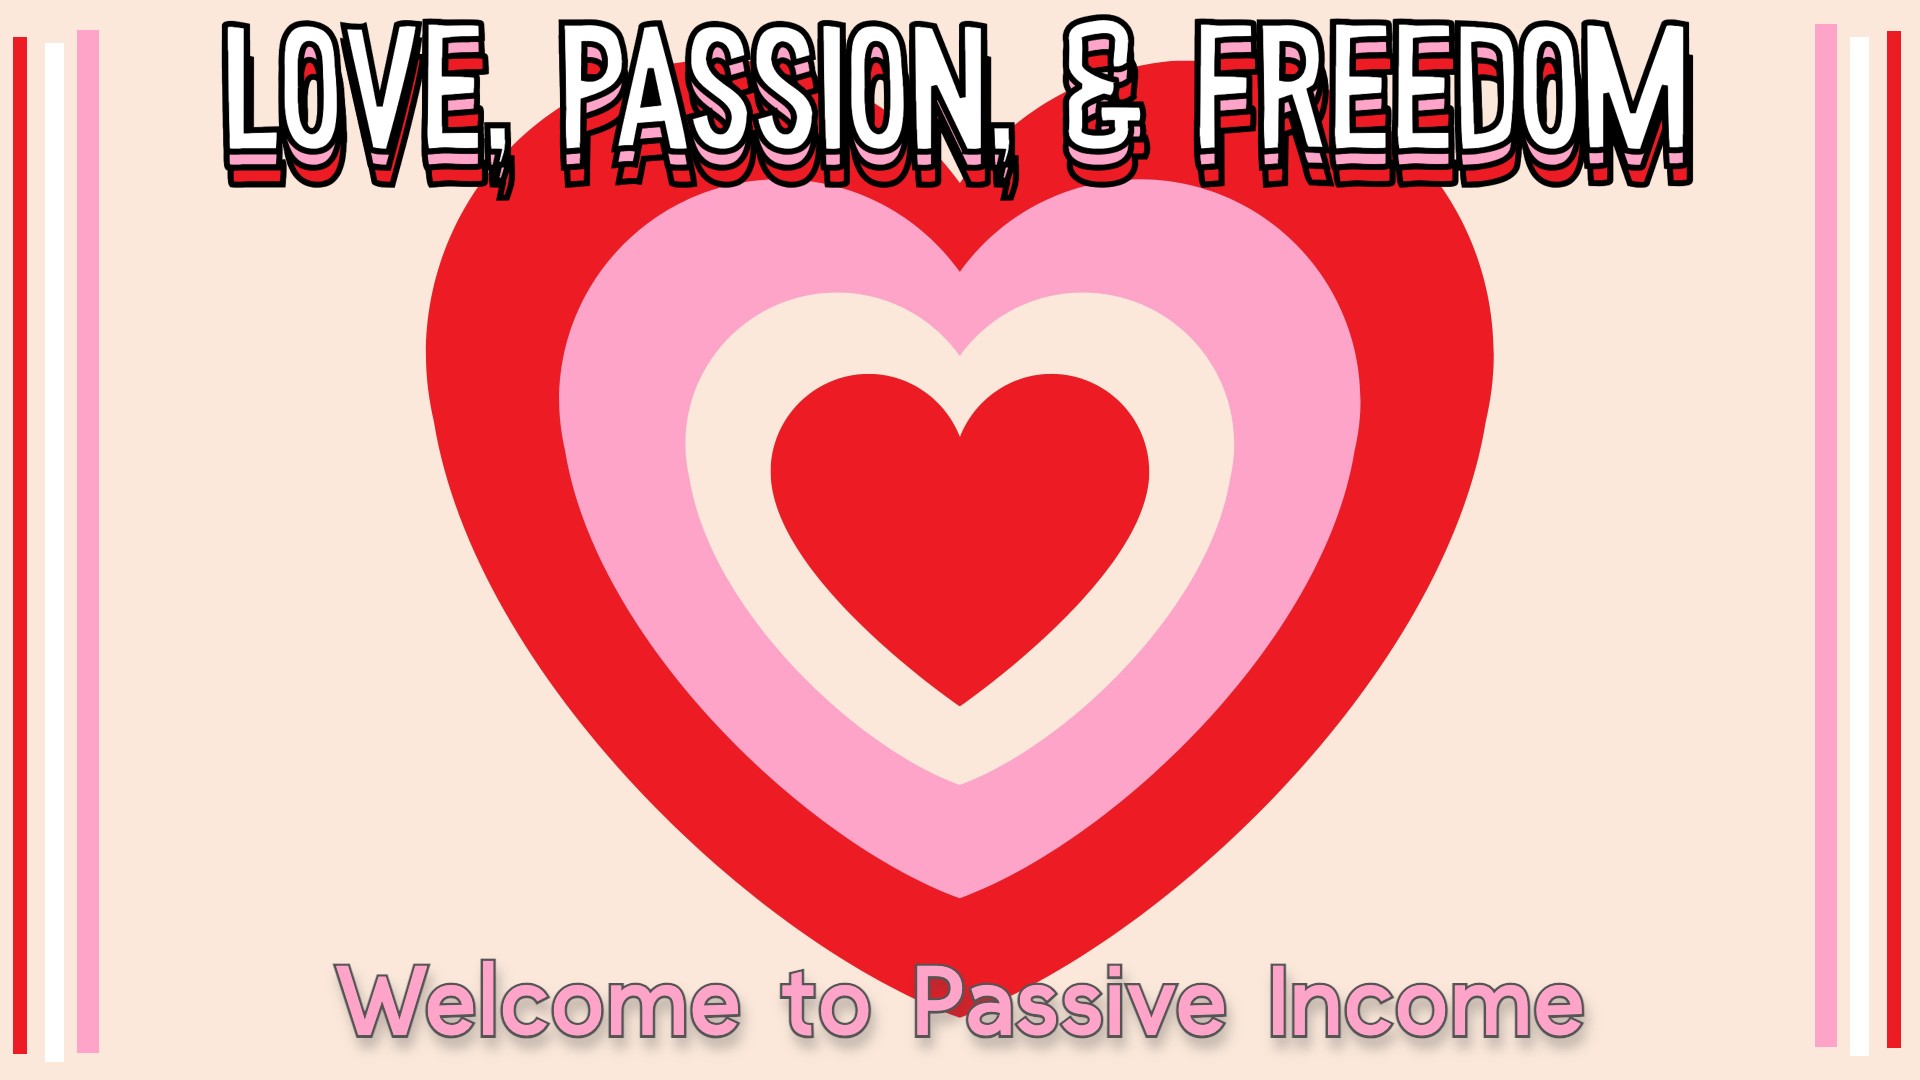 Love, Passion, & Freedom Welcome to Passive Income